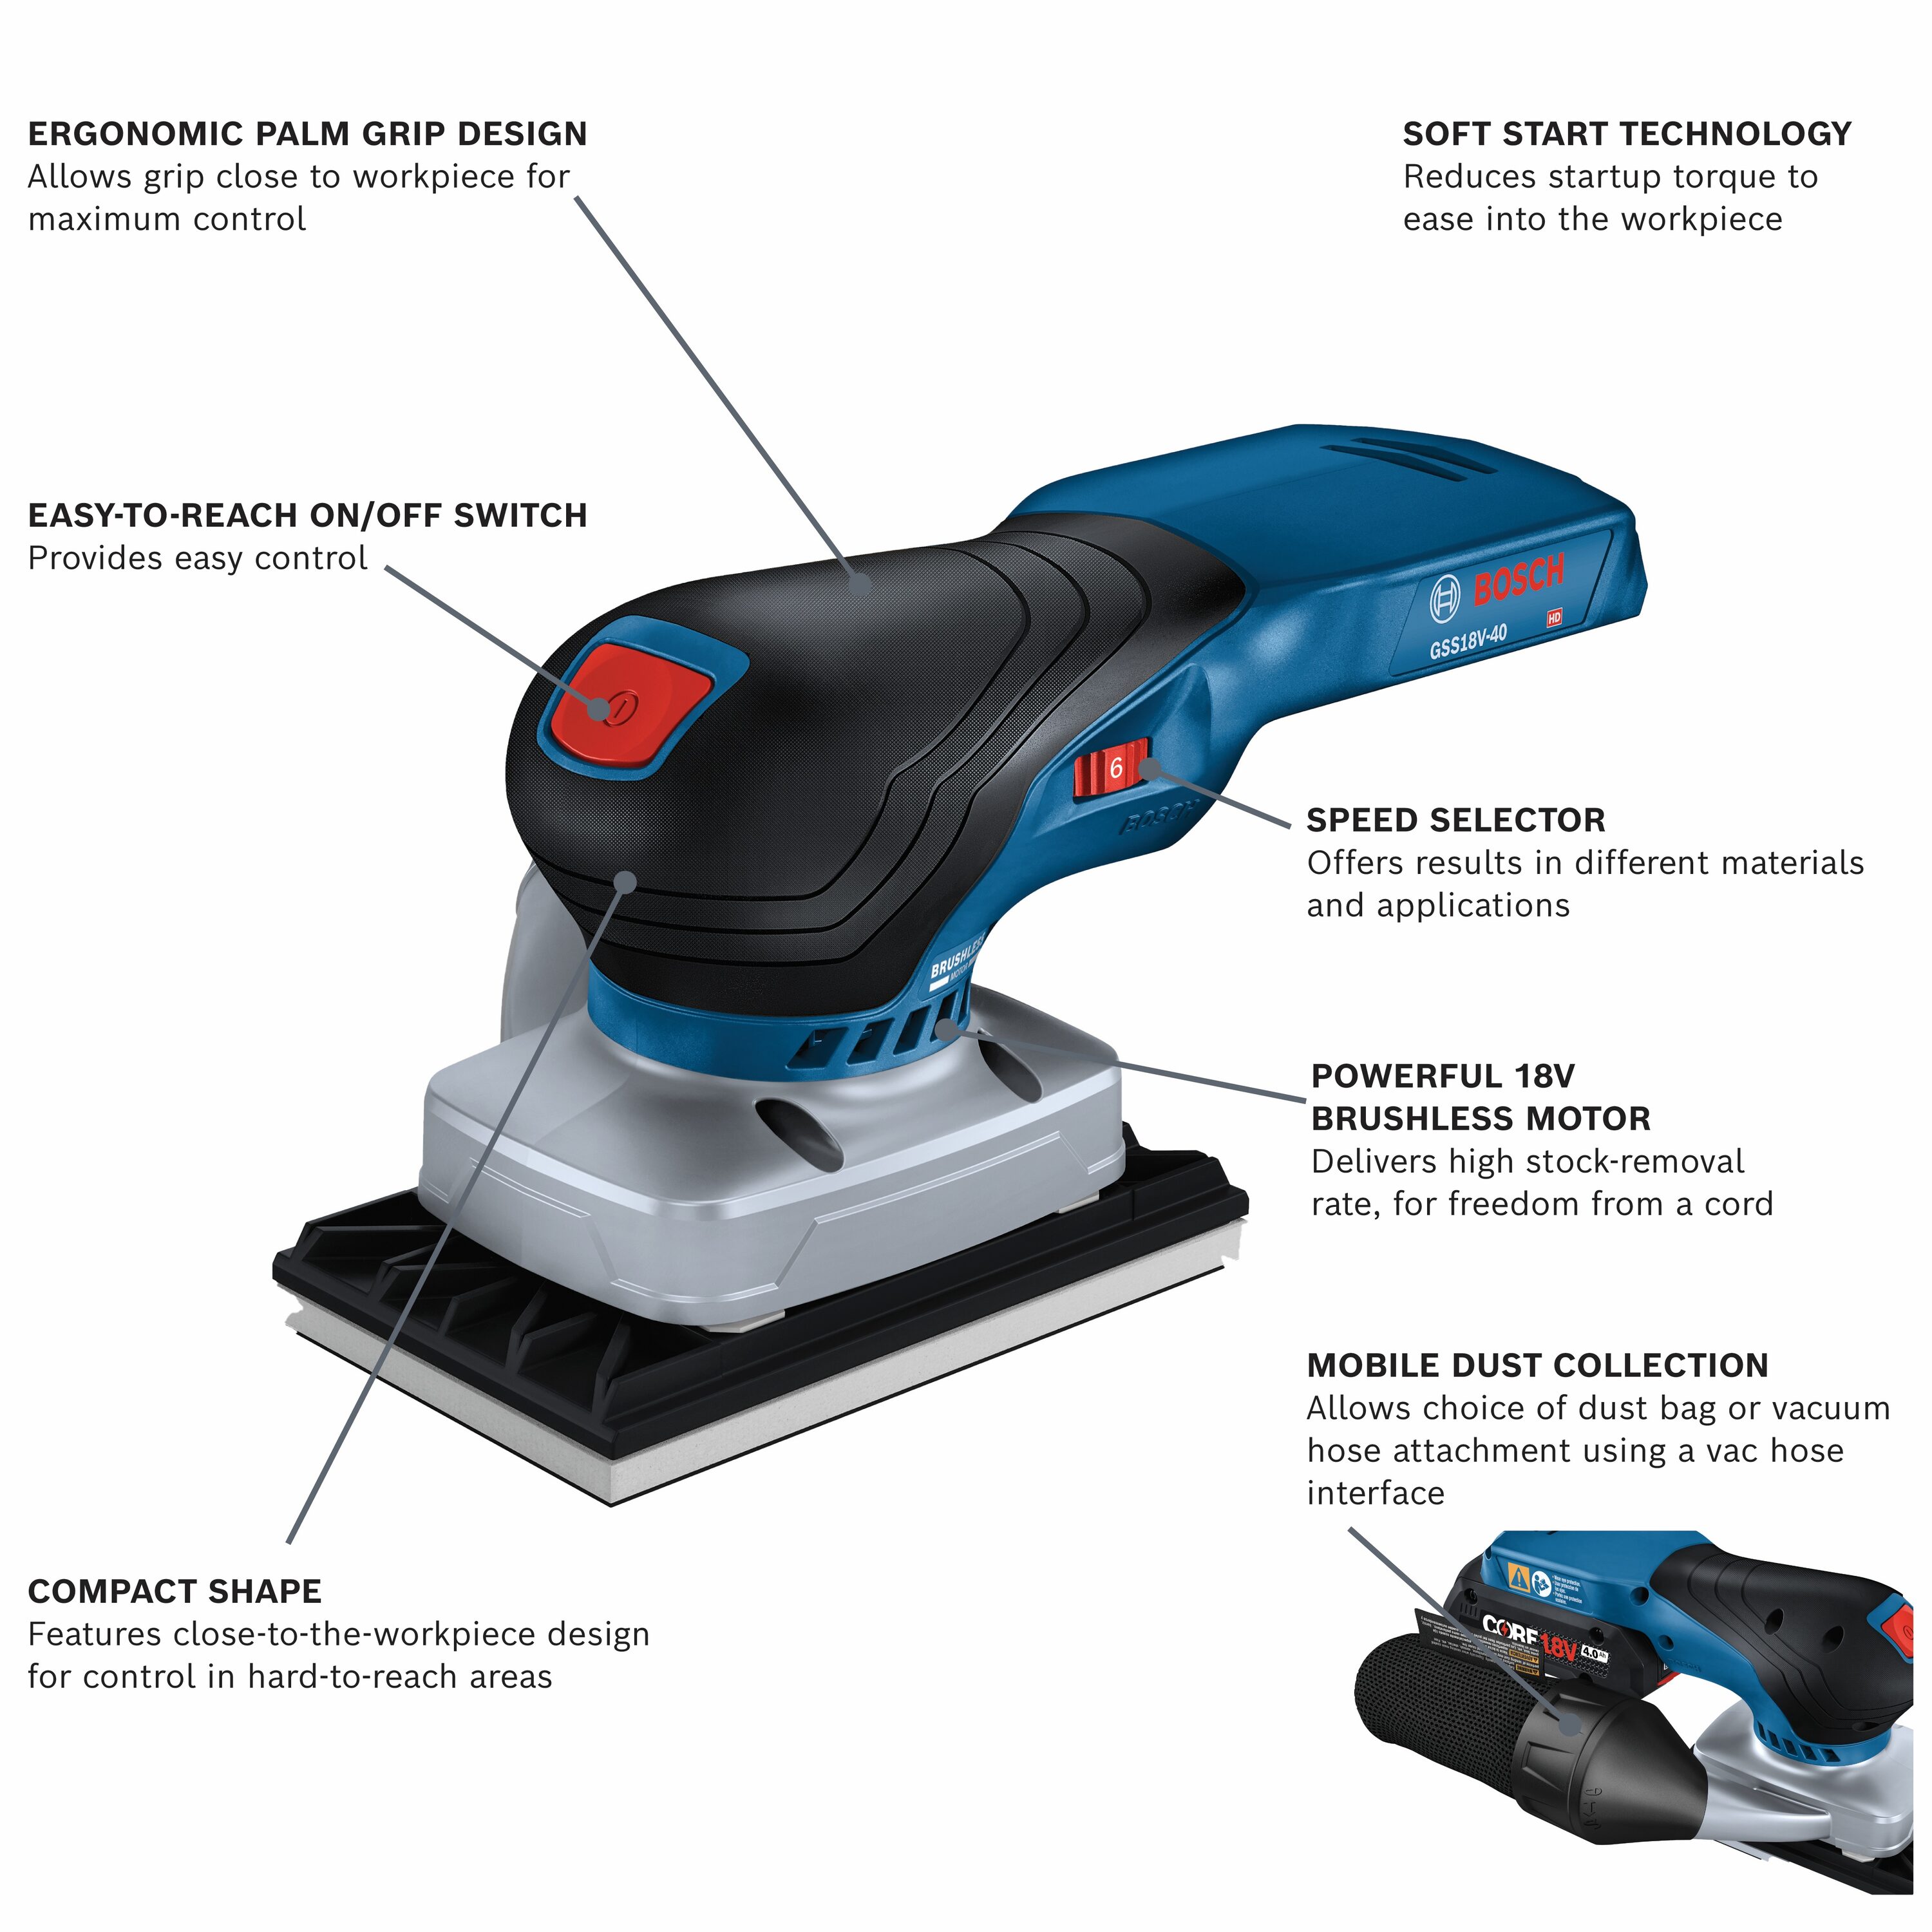 Bosch 18-Volt Brushless Cordless Variable Dust Sander Sanders at Speed department in the Power Orbital Management with